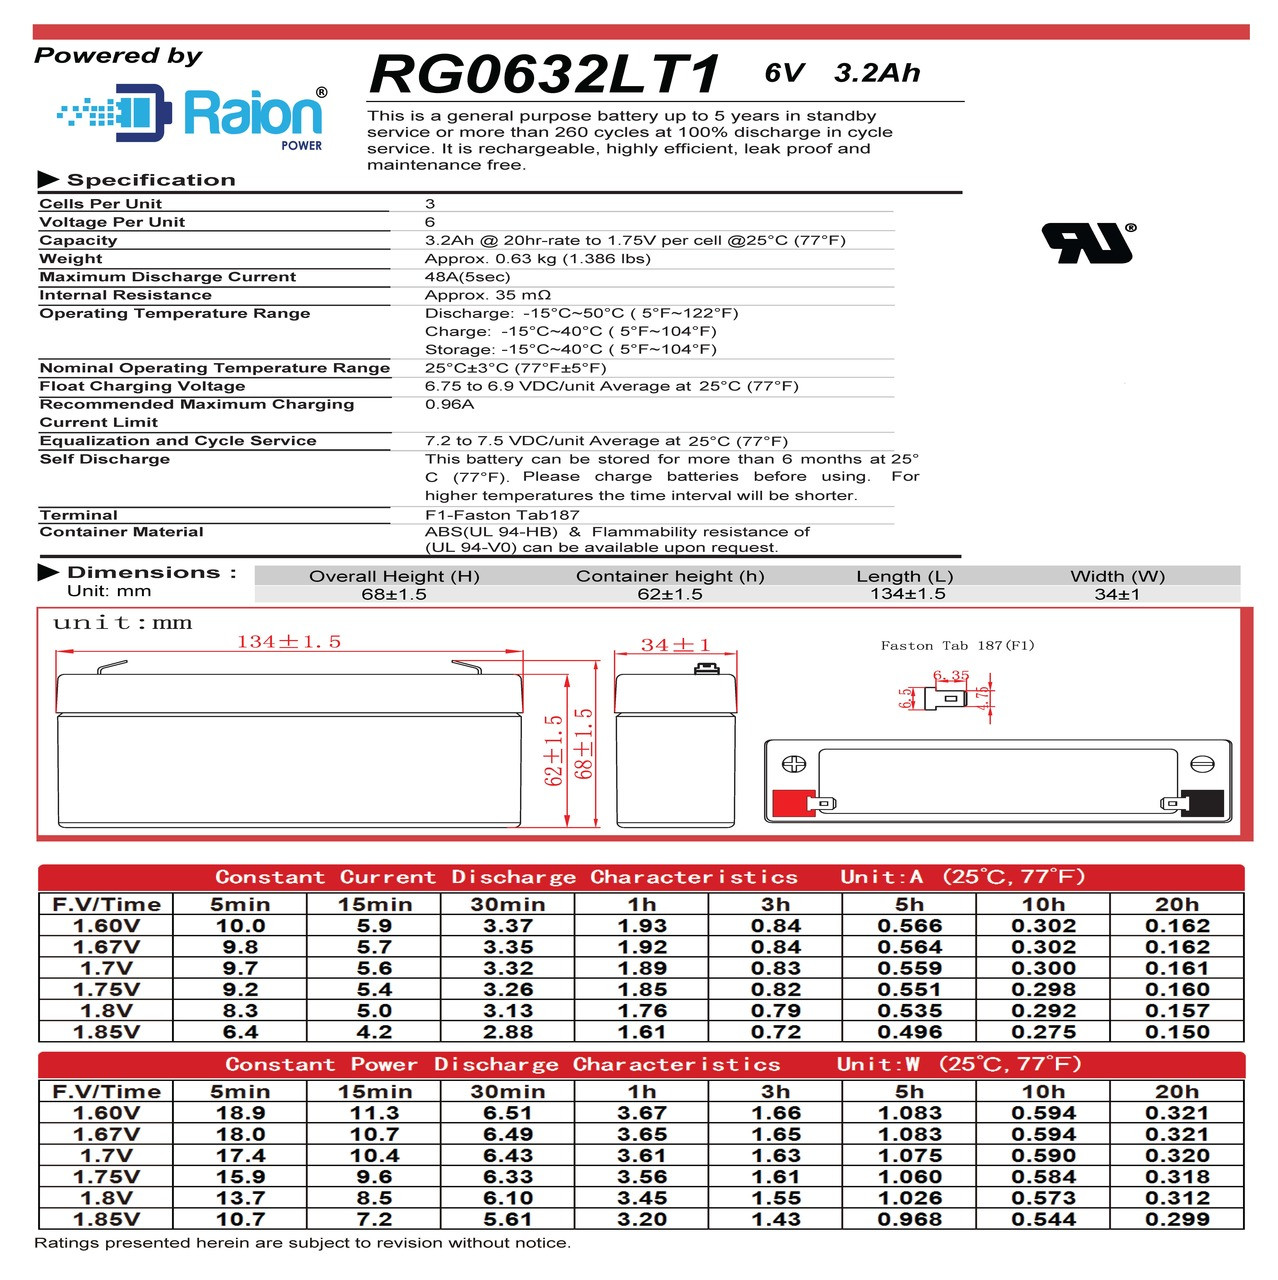 Raion Power RG0632LT1 6V 3.2Ah Battery Data Sheet for Ivac Medical Systems 590 Infusion Pump